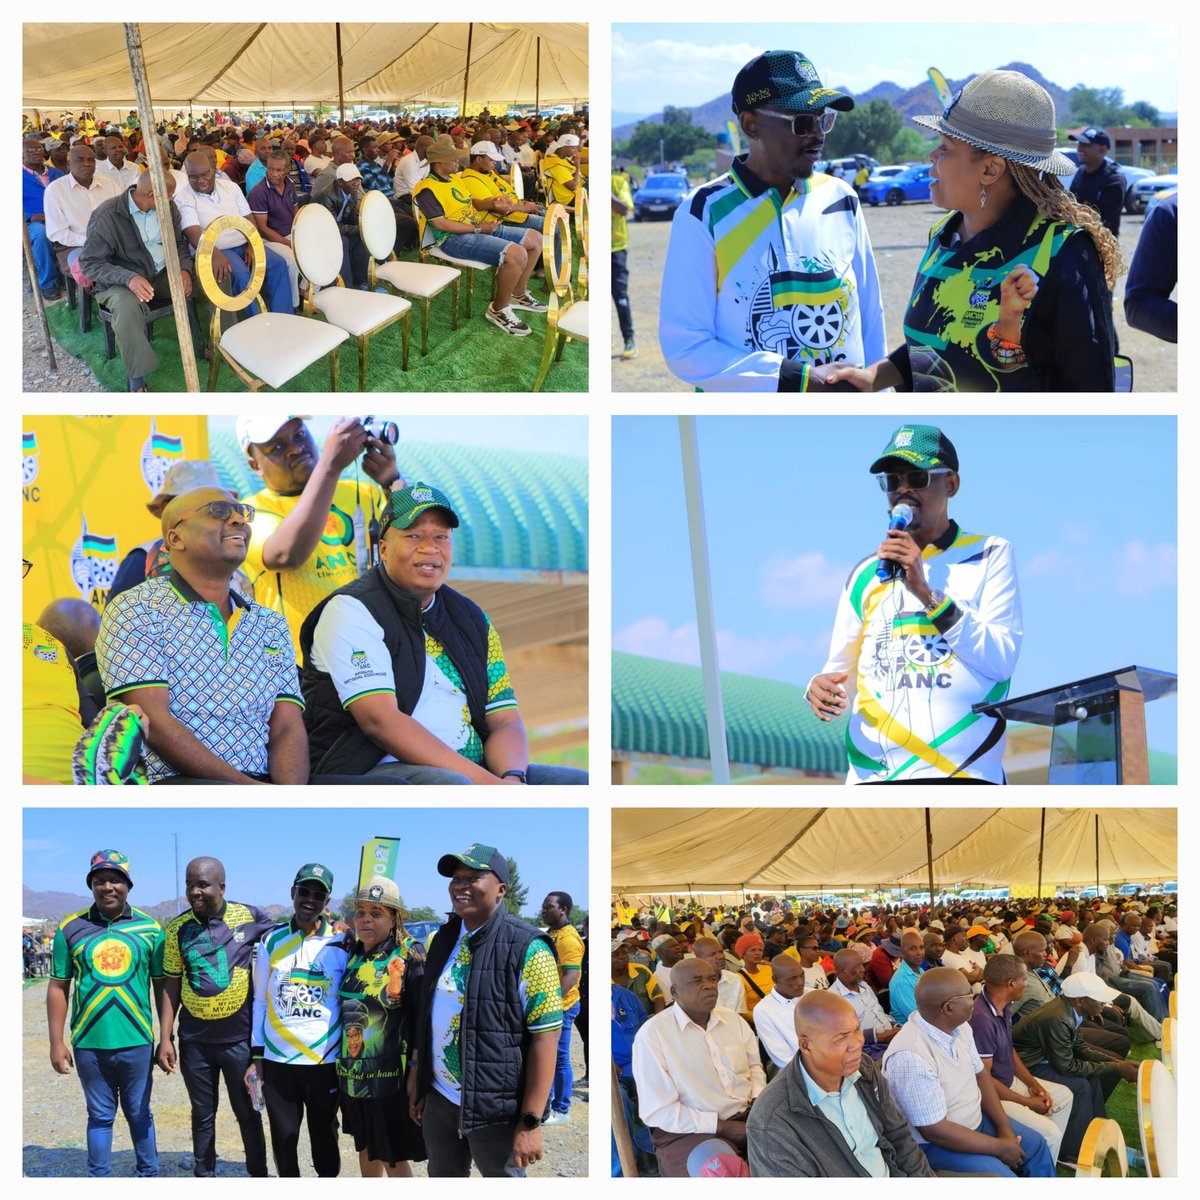 Today it was supposed be 400 new members to the ANC but we passed it in Fetakgomo/Tubatse Sekhukhune.#Khumbule Khaya🖤💚💛🙏🏾✊🏾